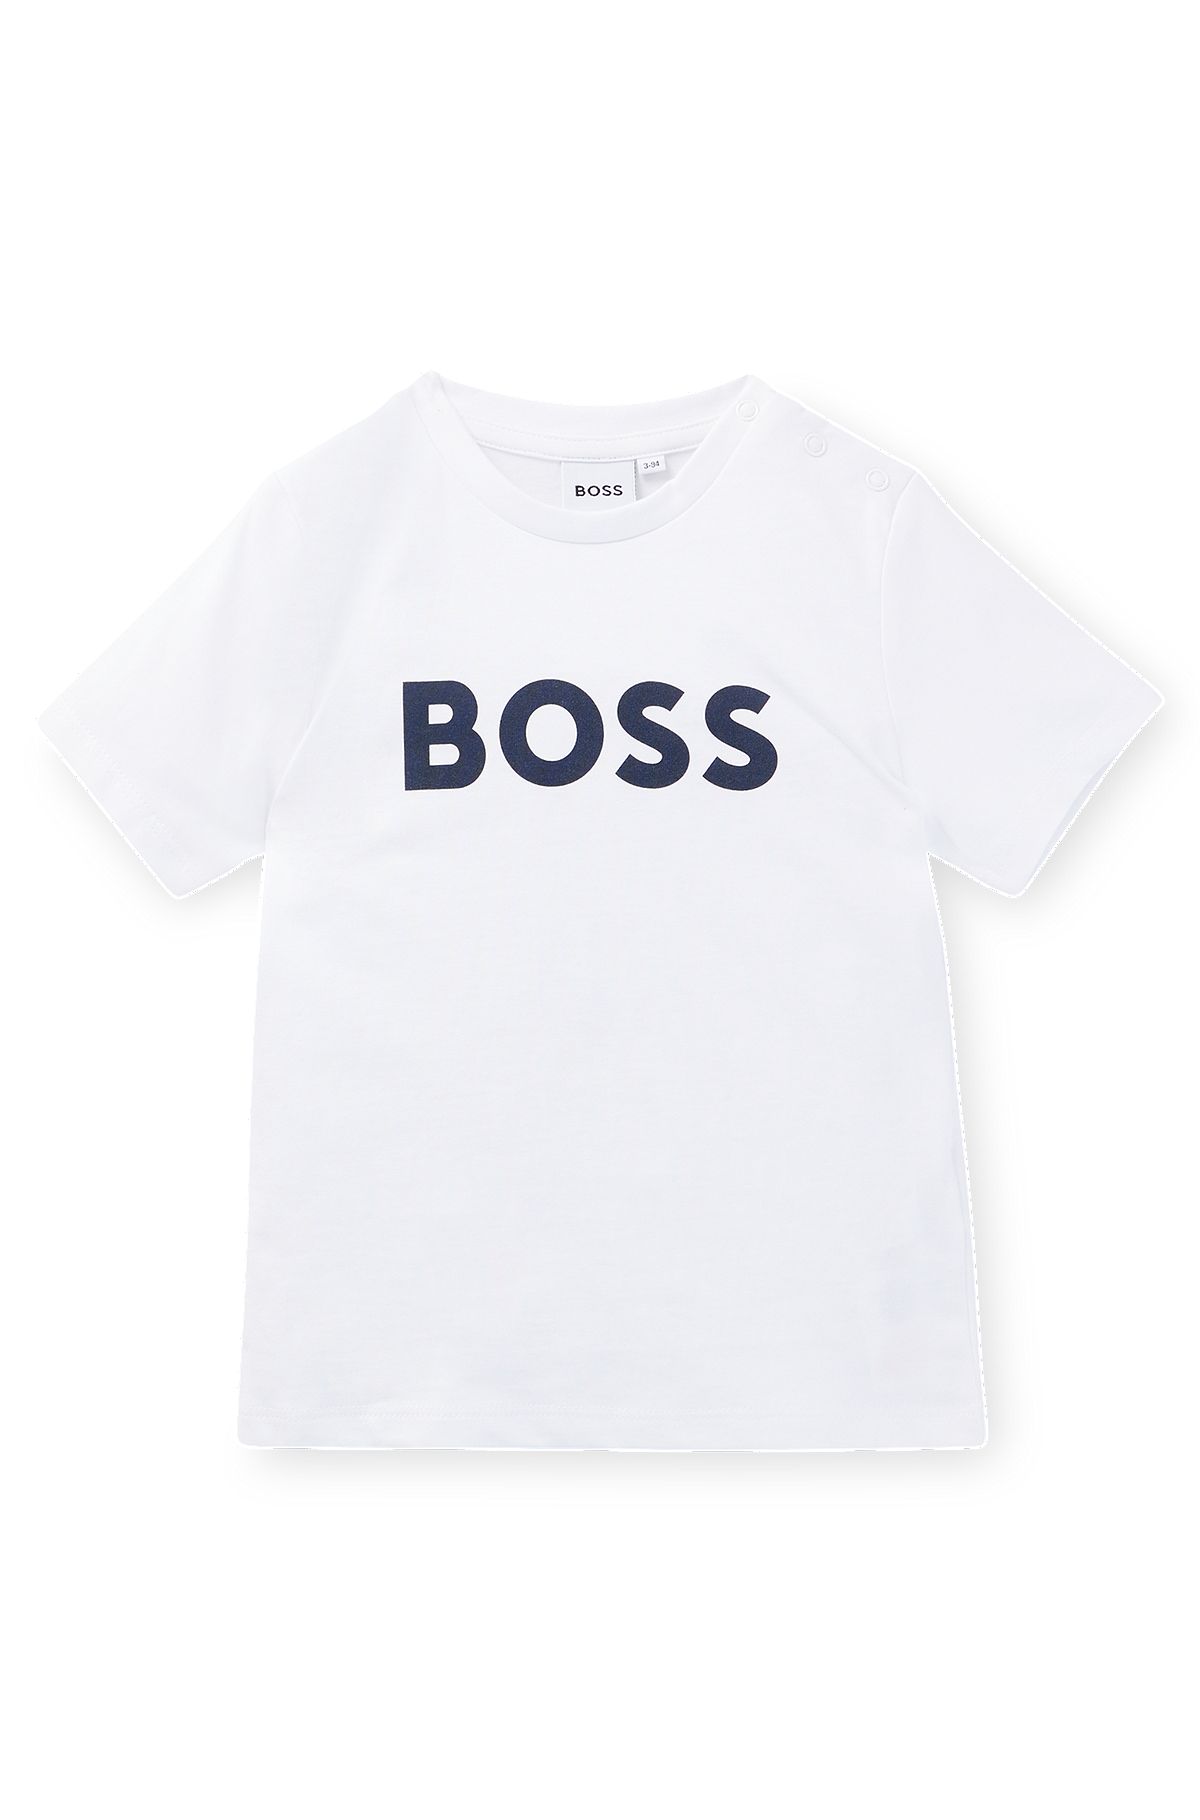 Kids' T-shirt in cotton with logo print, White